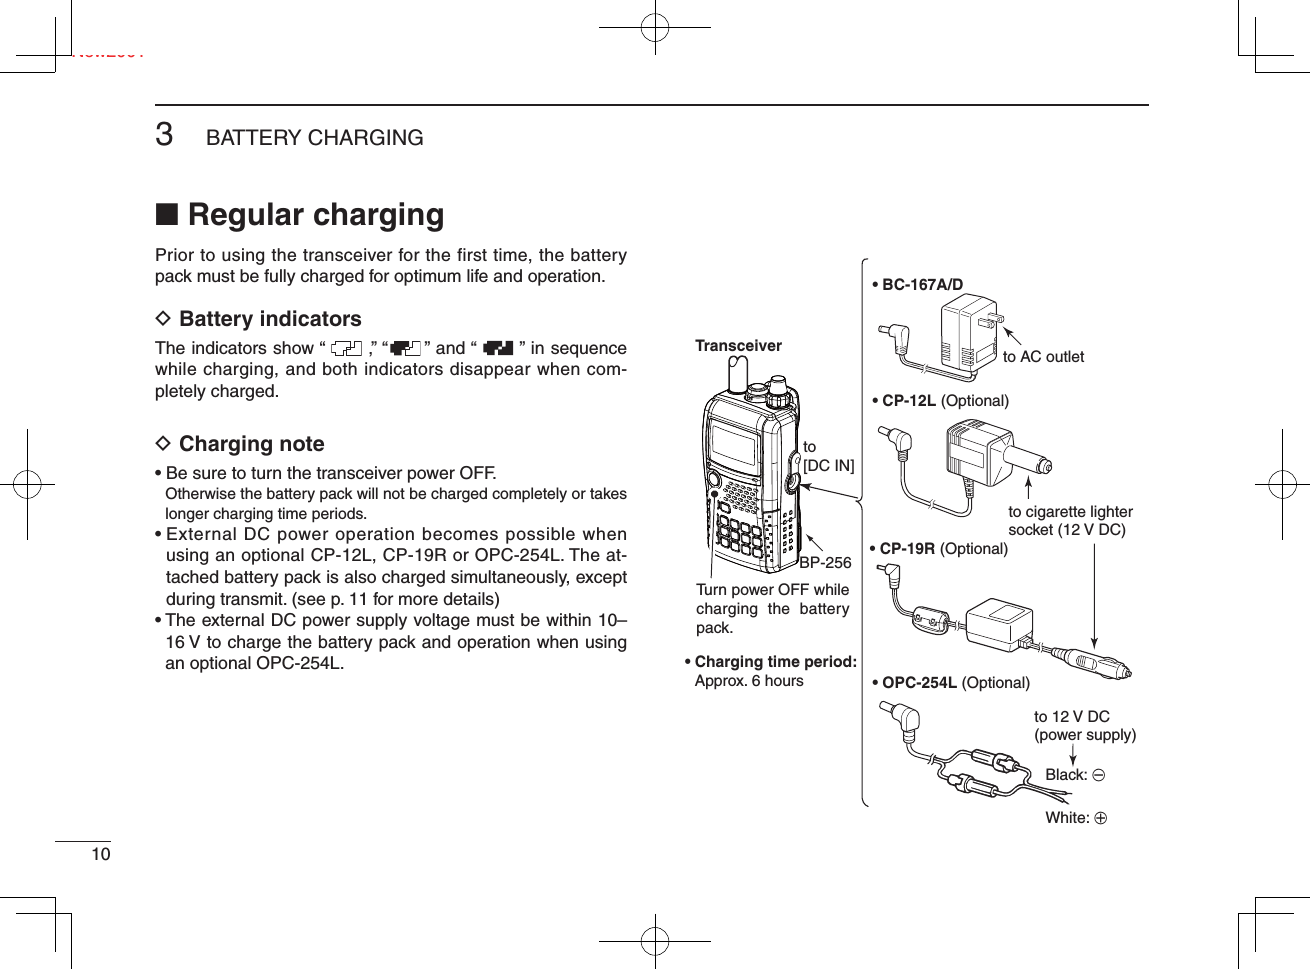 Ne103BATTERY CHARGINGNew2001■ Regular chargingPrior to using the transceiver for the first time, the battery pack must be fully charged for optimum life and operation.D Battery indicatorsThe indicators show “       ,” “      ” and “       ” in sequence while charging, and both indicators disappear when com-pletely charged.D Charging note• Be sure to turn the transceiver power OFF.Otherwise the battery pack will not be charged completely or takes longer charging time periods.•  External DC power operation becomes possible when using an optional CP-12L, CP-19R or OPC-254L. The at-tached battery pack is also charged simultaneously, except during transmit. (see p. 11 for more details)•  The external DC power supply voltage must be within 10–16 V to charge the battery pack and operation when using an optional OPC-254L.• BC-167A/D• CP-12L (Optional)• OPC-254L (Optional)to AC outletto cigarette lightersocket (12 V DC)to 12 V DC(power supply)White: +Black: _Transceiverto [DC IN]Turn power OFF while charging the battery pack.• Charging time period: Approx. 6 hoursBP-256 • CP-19R (Optional)